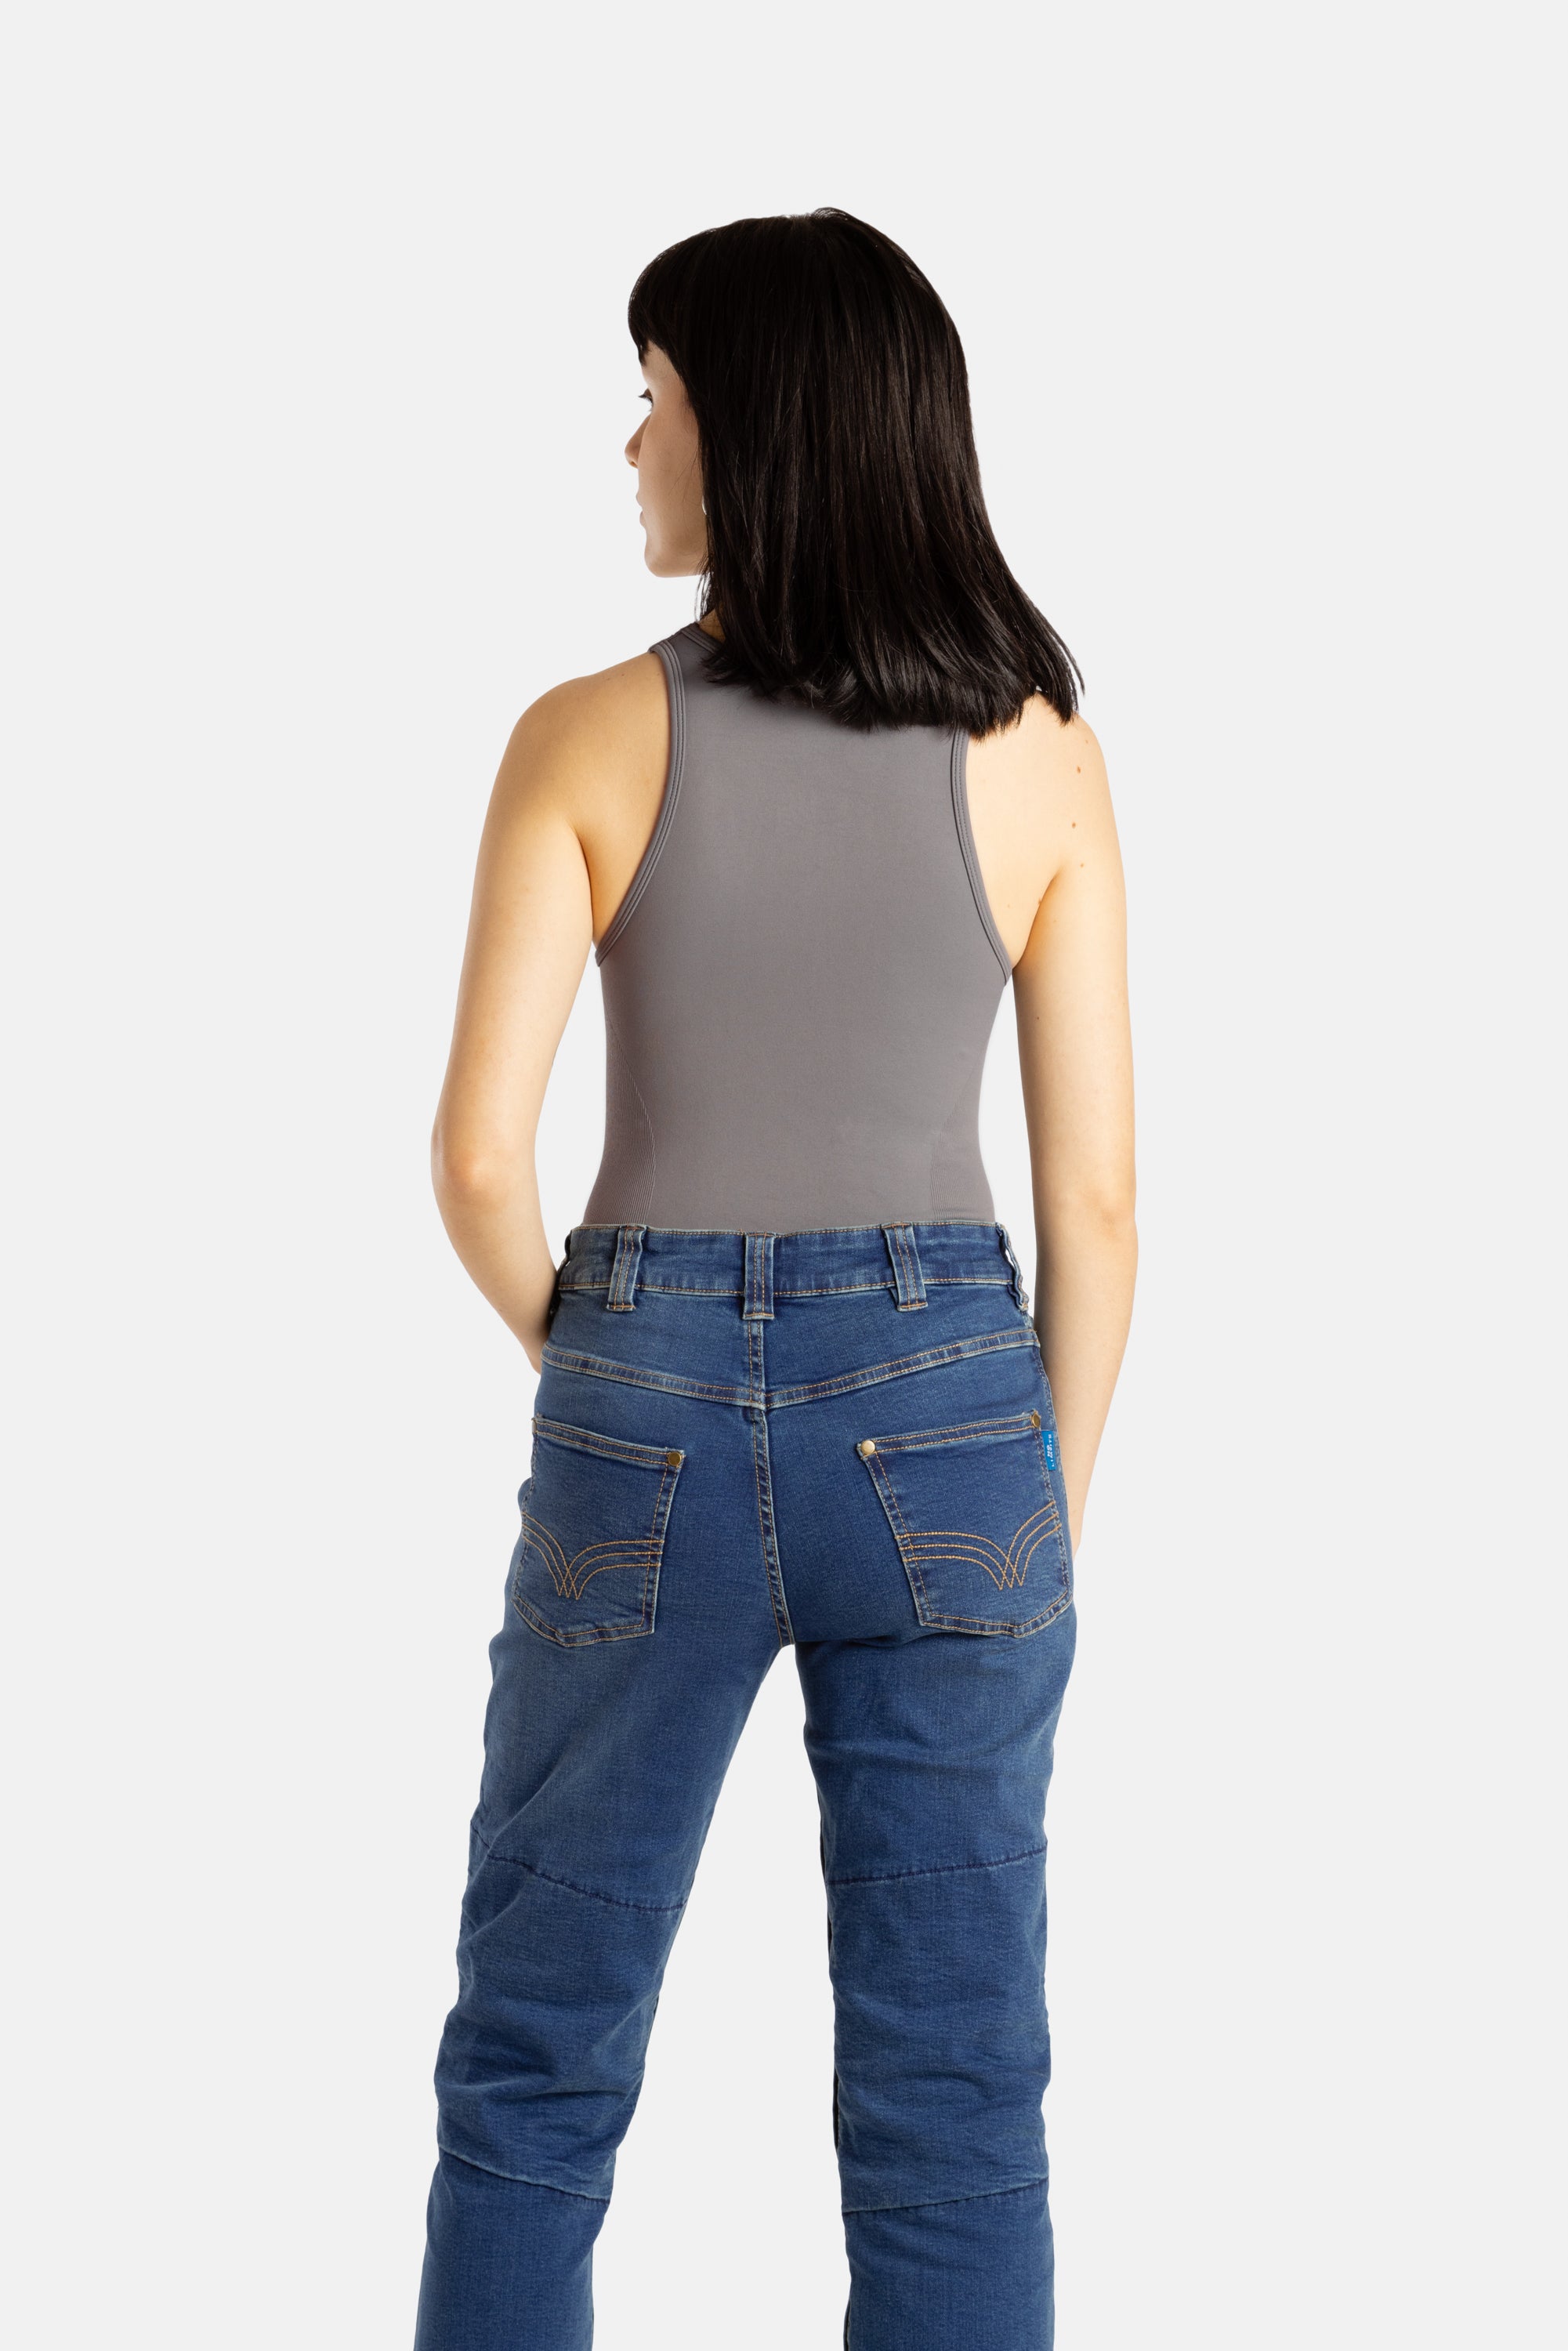 The back of a white woman with long black hair and hoop earrings wears a black tank top and denim jeans.